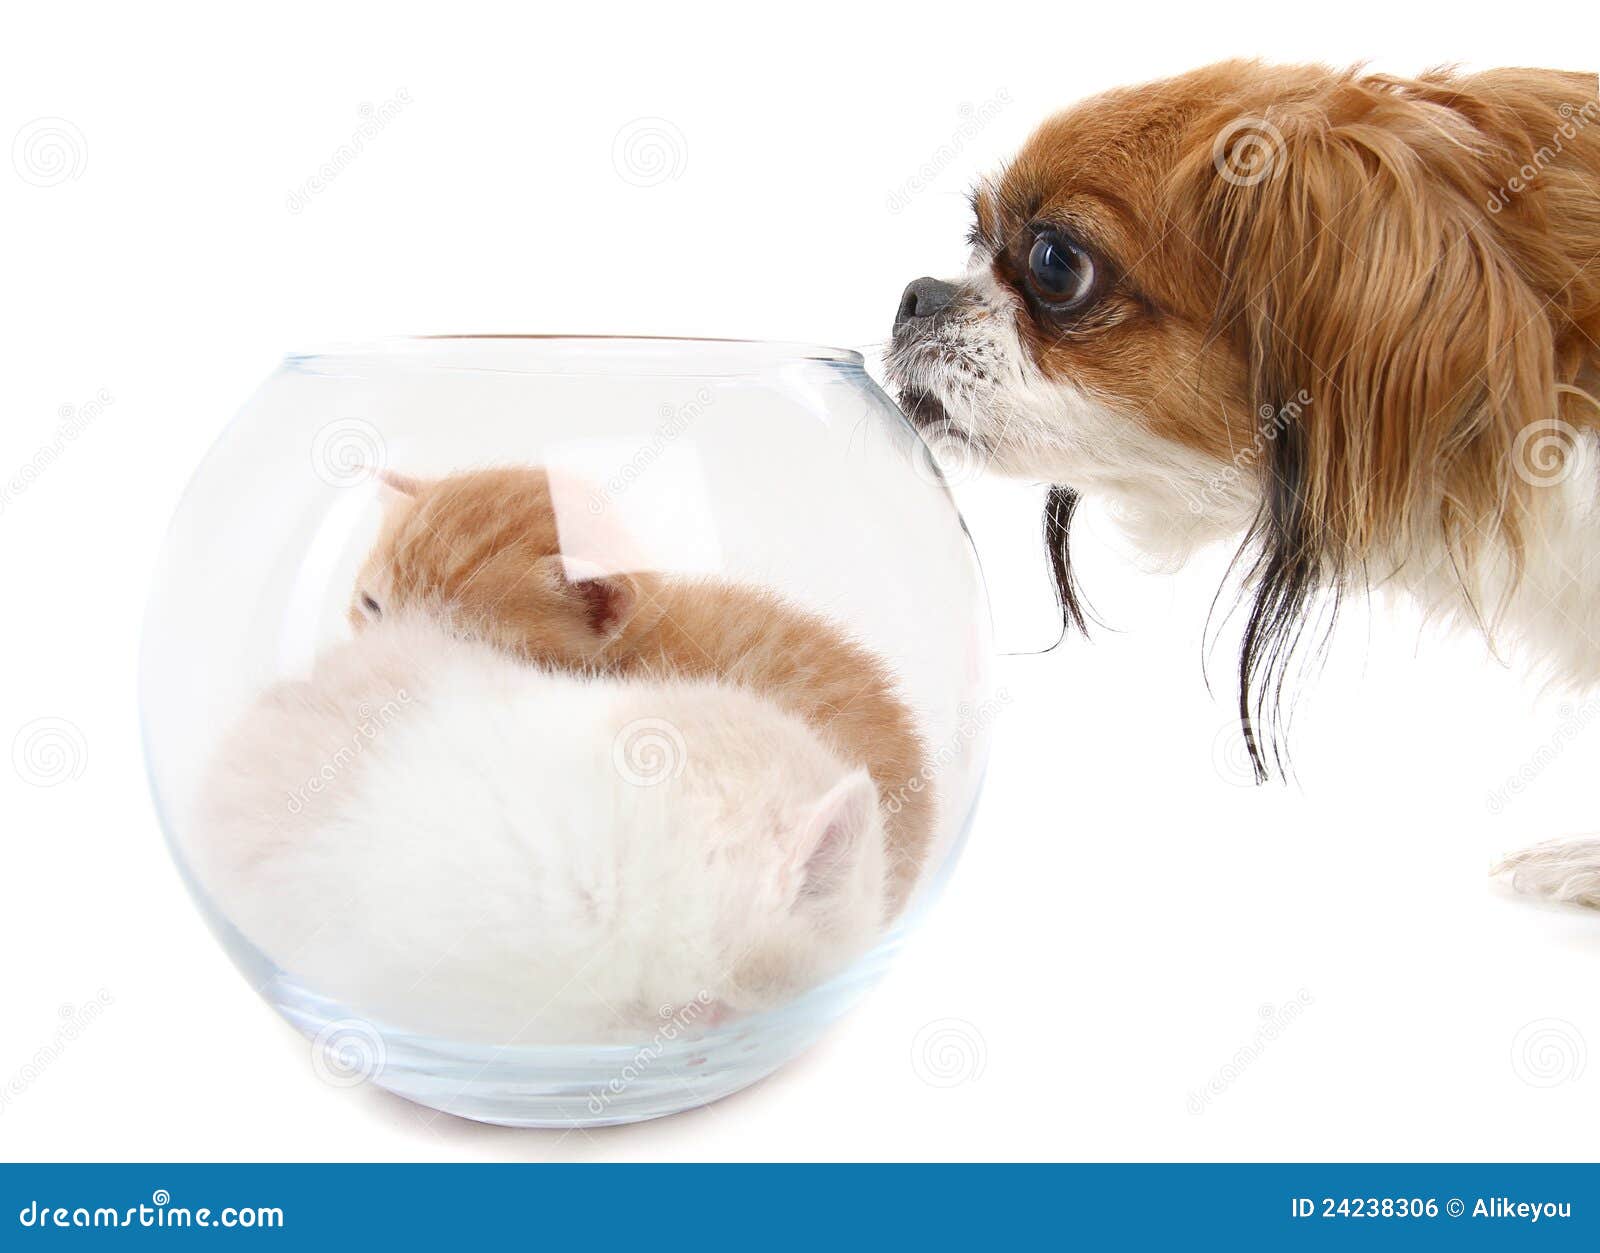 dog sniffing clipart - photo #41